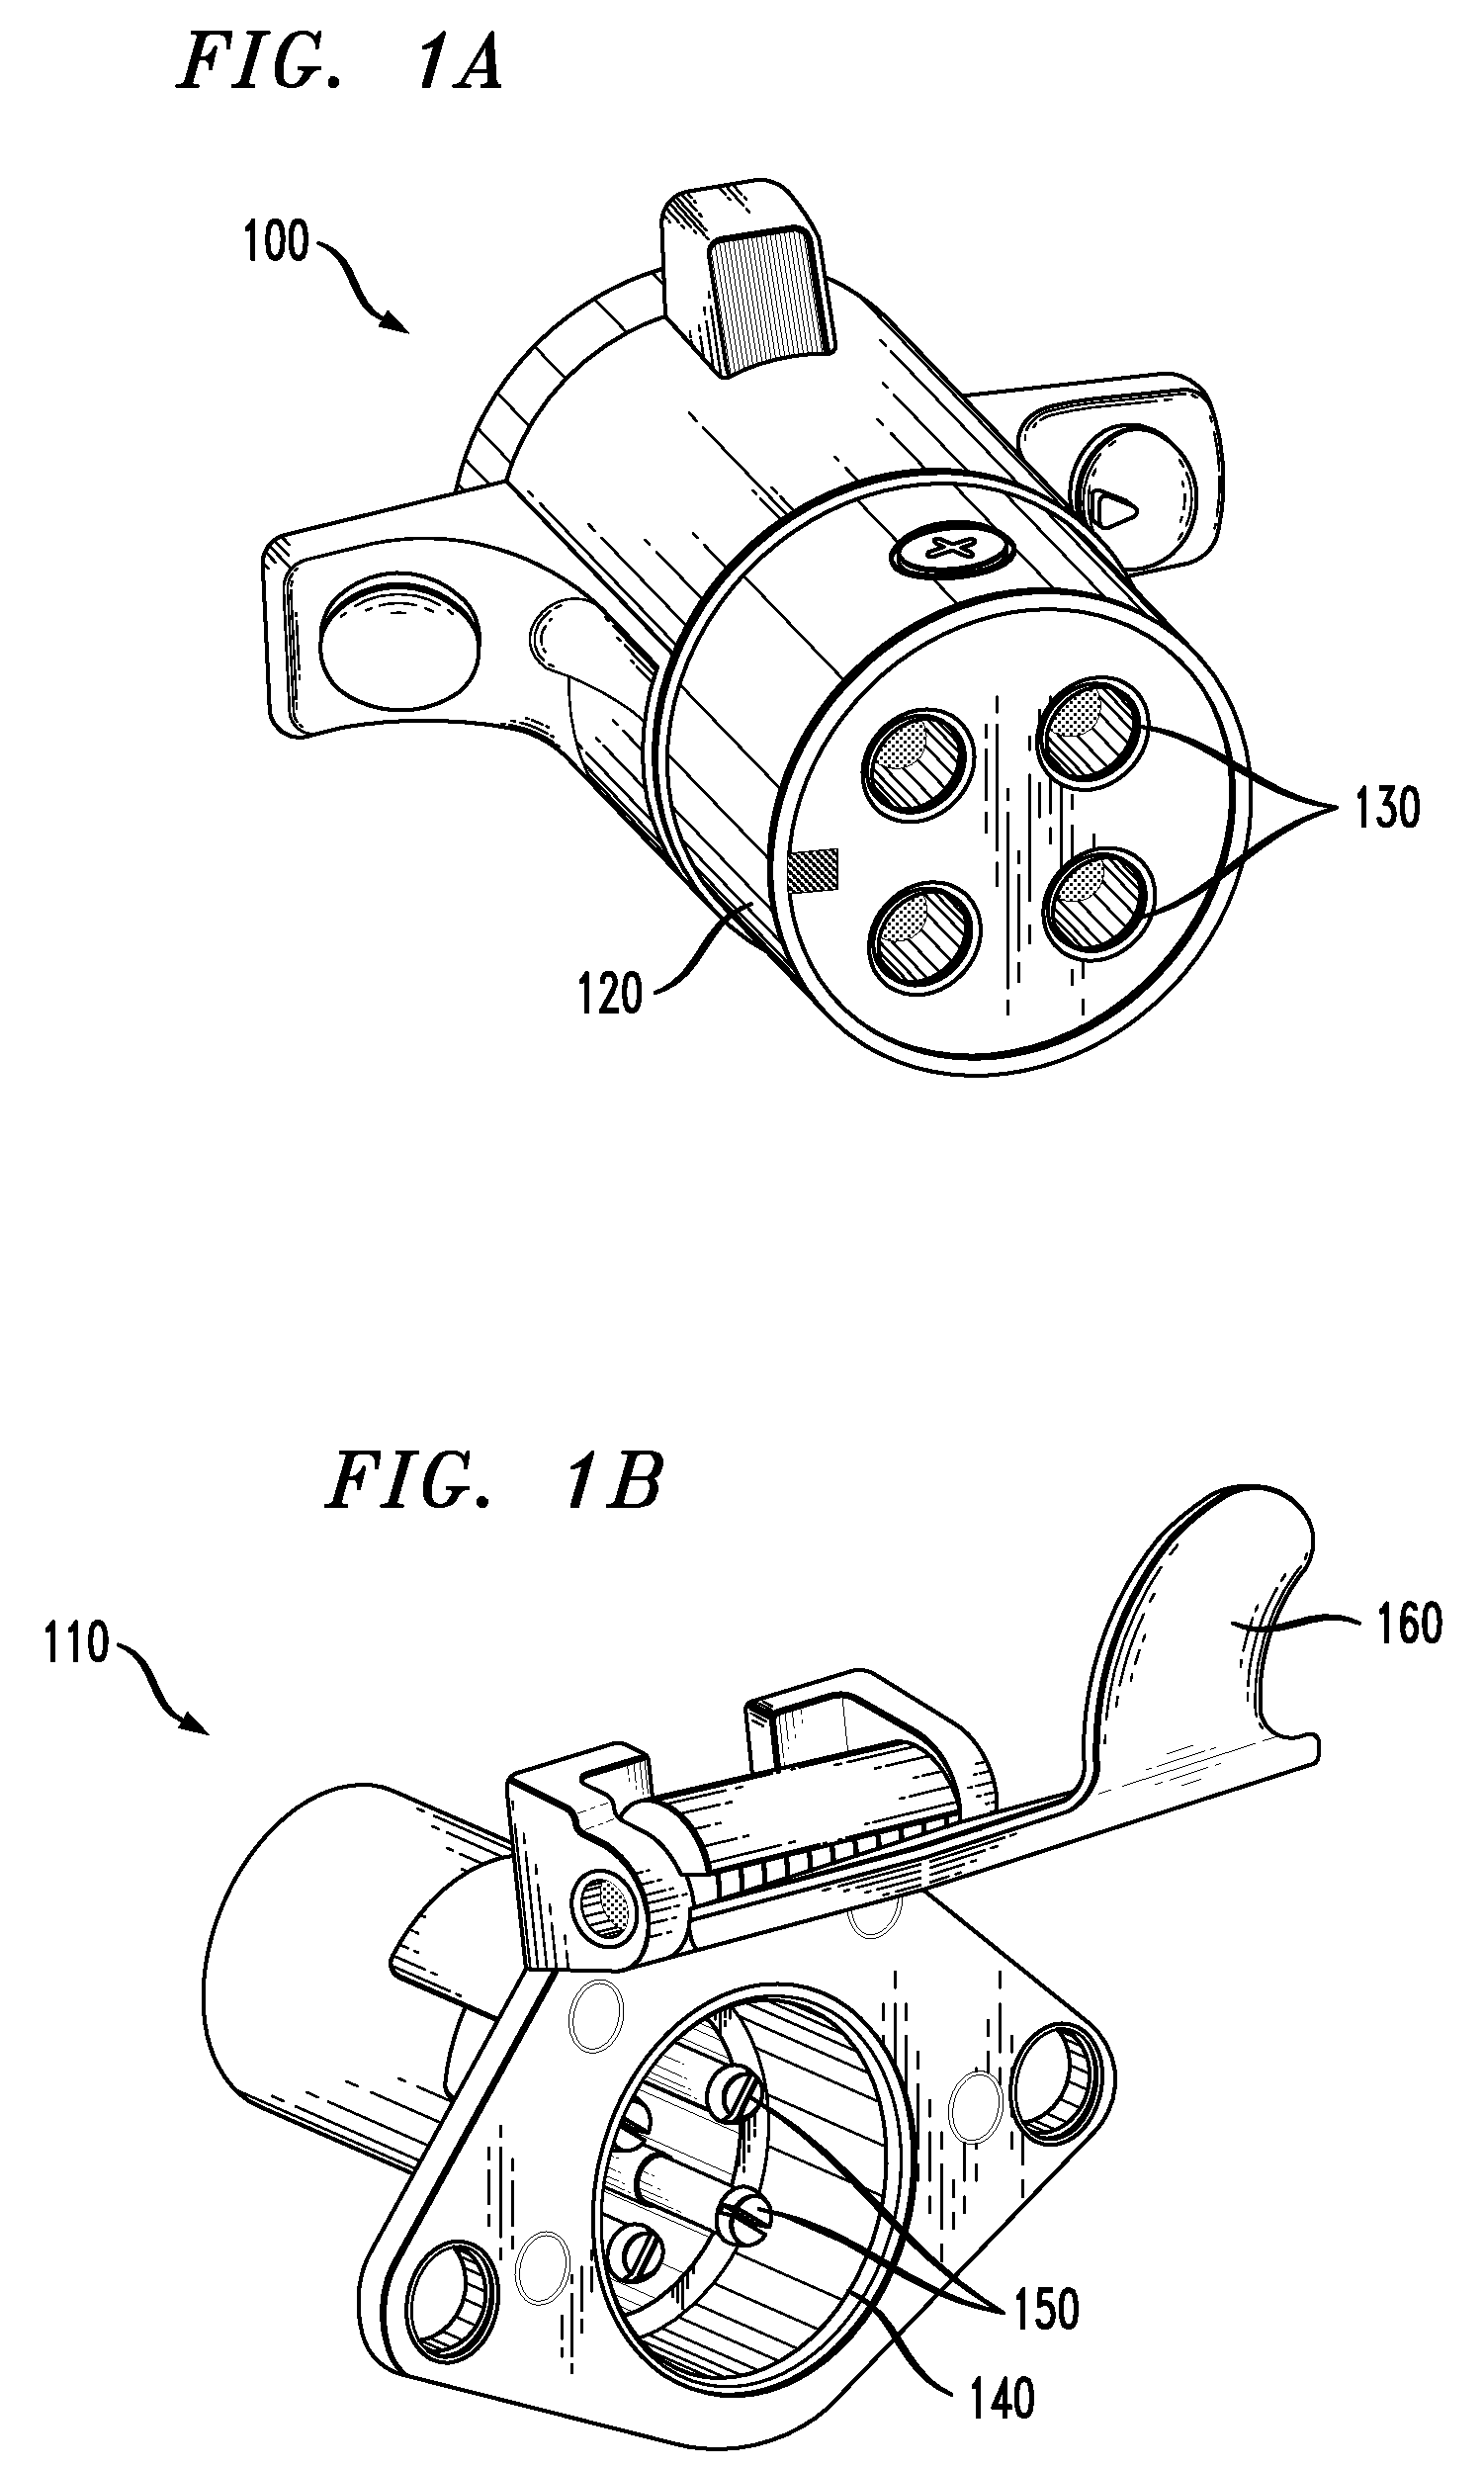 Apparatus for cleaning female electrical terminals